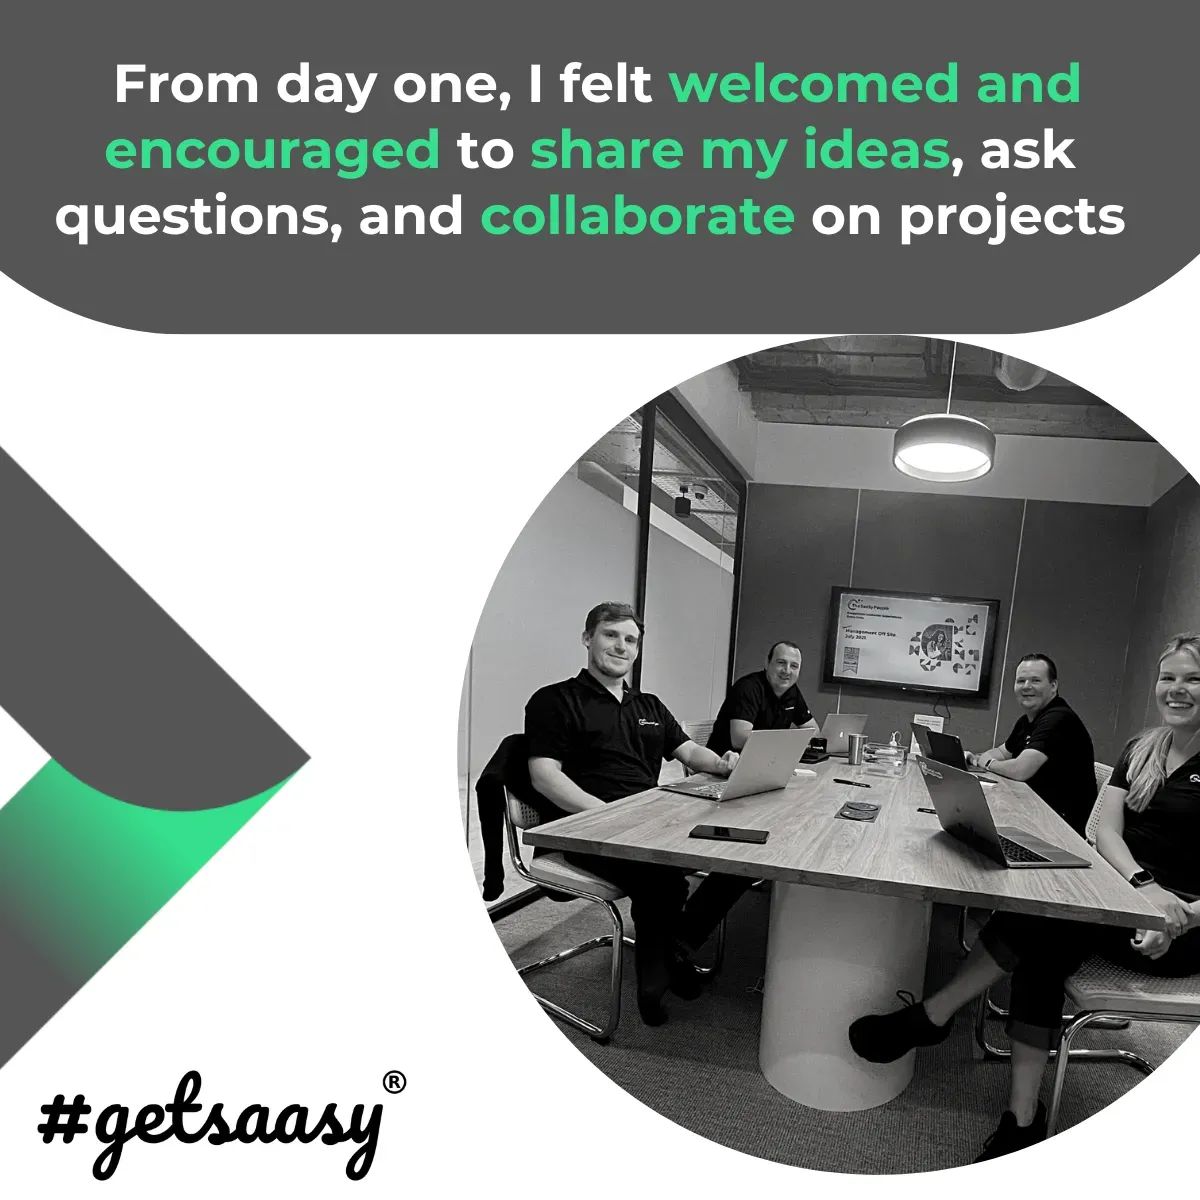 The collaborative and supportive culture at SaaSy has made all the difference in my work life. From day one, I felt:

⭐Encouraged
⭐Able to ask questions
⭐Valued
⭐#worklifebalance is understood
⭐Overall #jobsatisfaction achieved

#getsaasy #happyfriday #employeereview